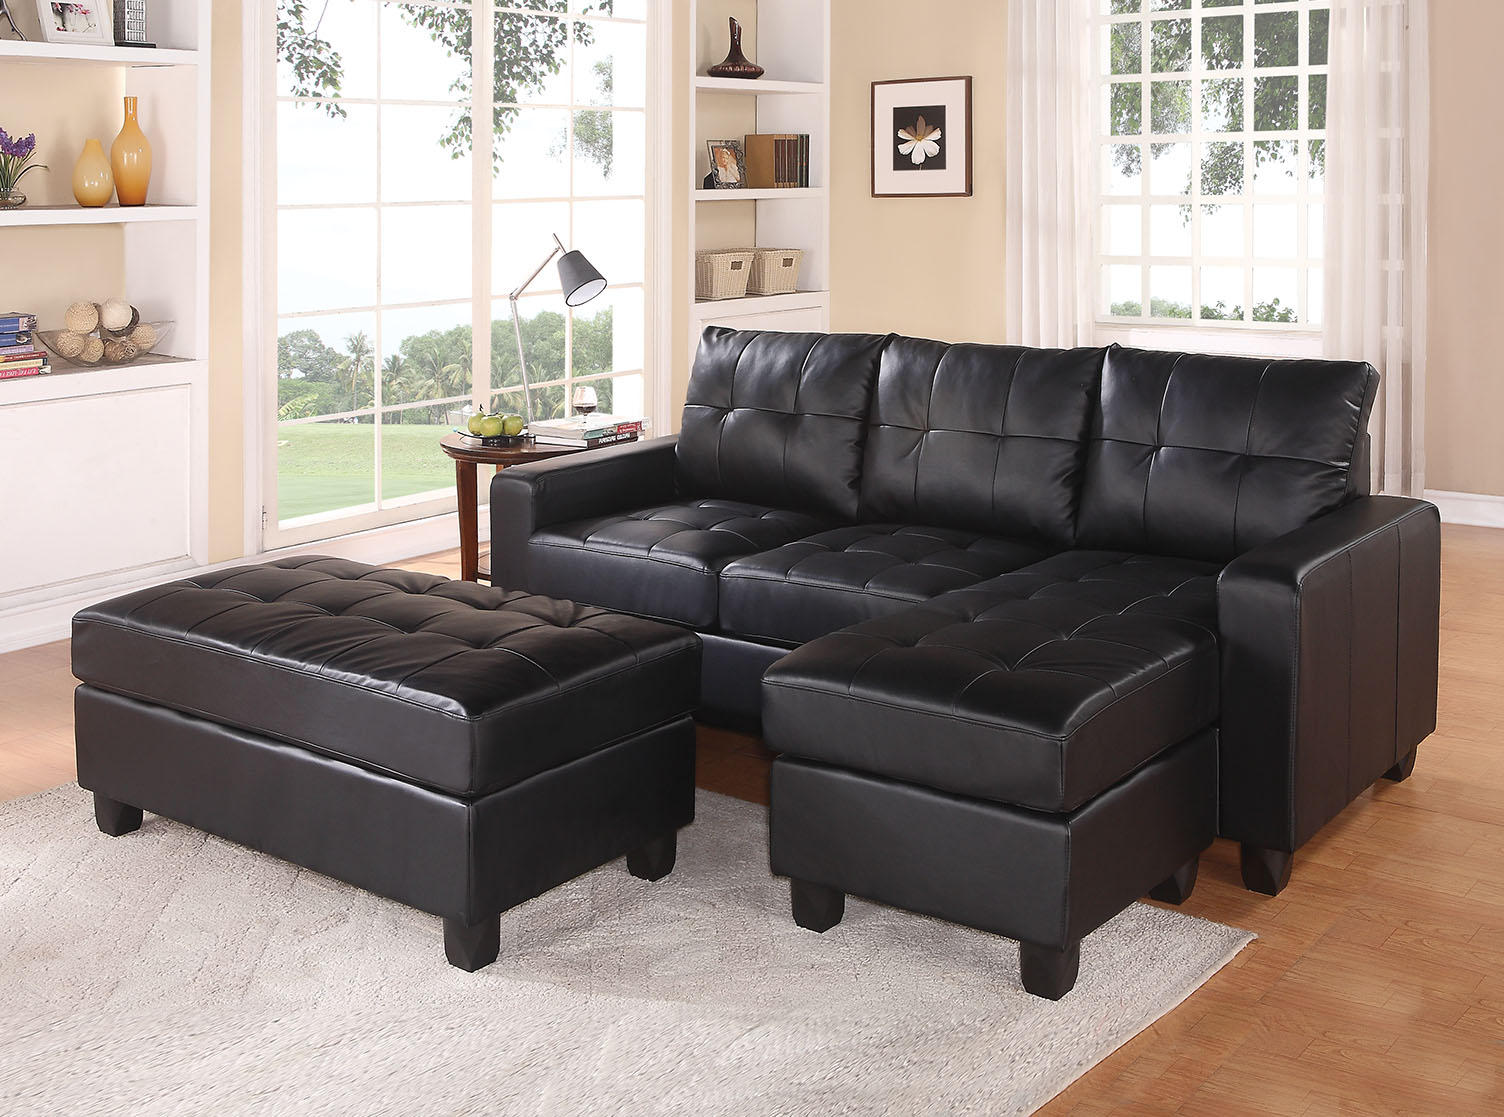 83" X 57" X 35" Black Bonded Leather Match Sectional Sofa With Ottoman